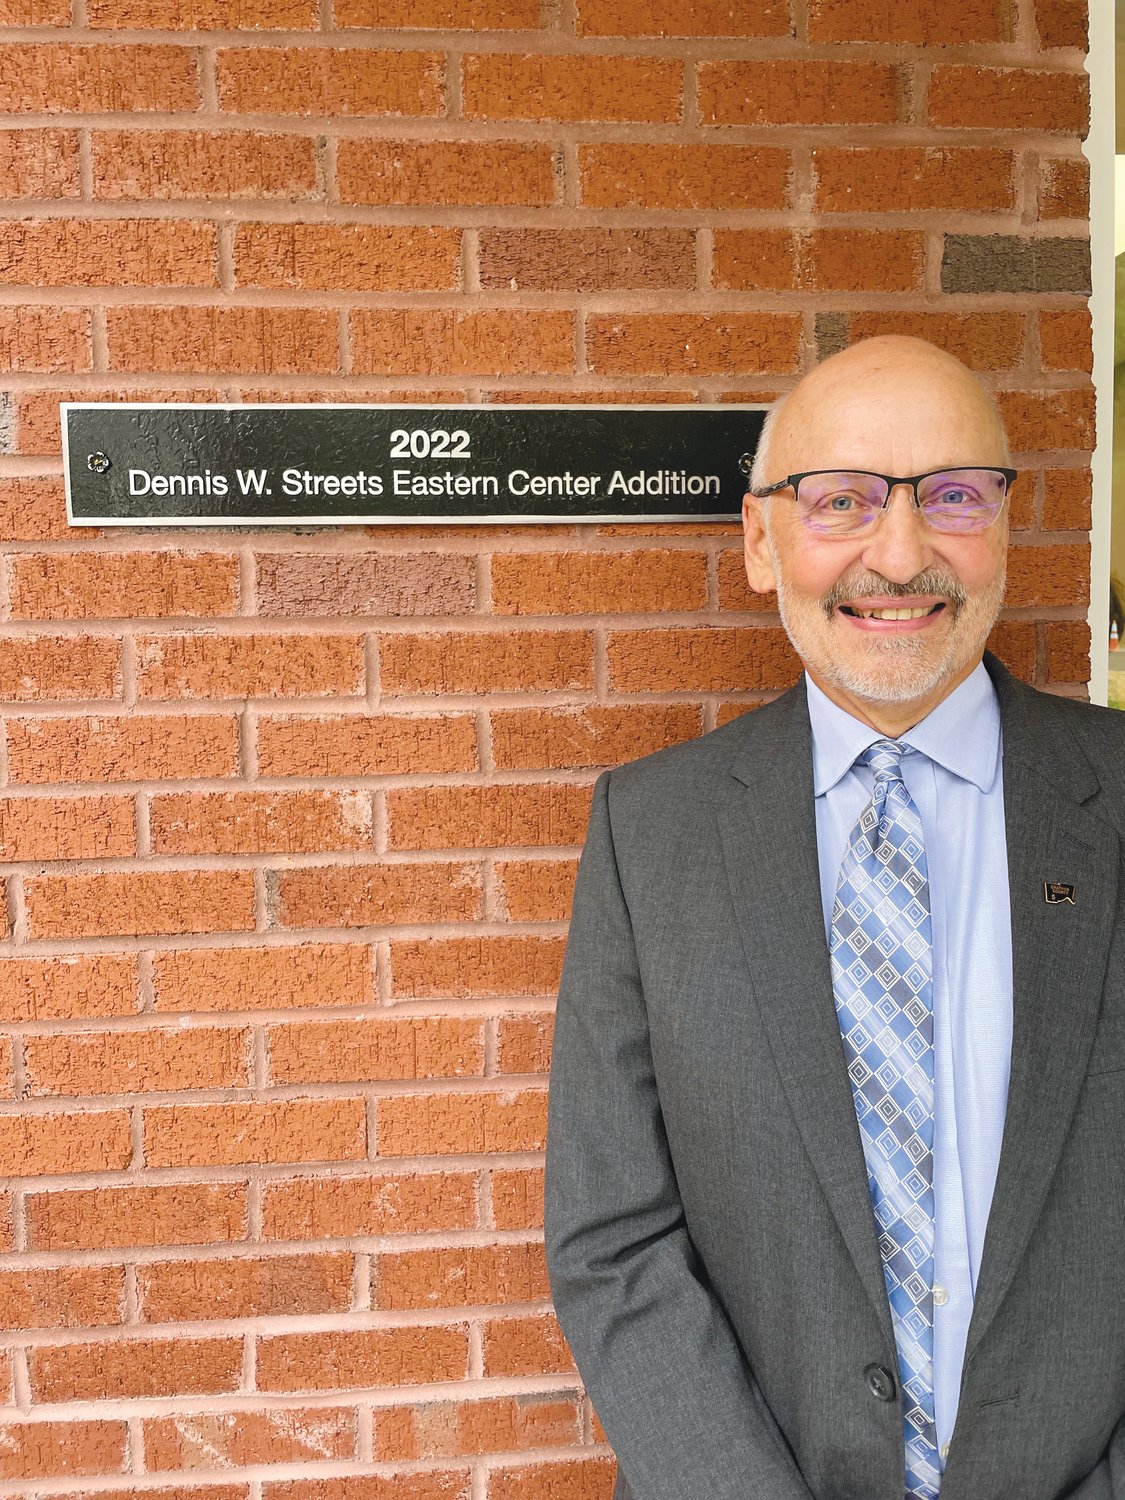 Retired Chatham County Council on Aging Director Dennis Streets stands next to the plaque proclaiming the Eastern Chatham Senior Center addition as the ‘Dennis W. Streets Eastern Center Addition’ last Friday in Pittsboro.